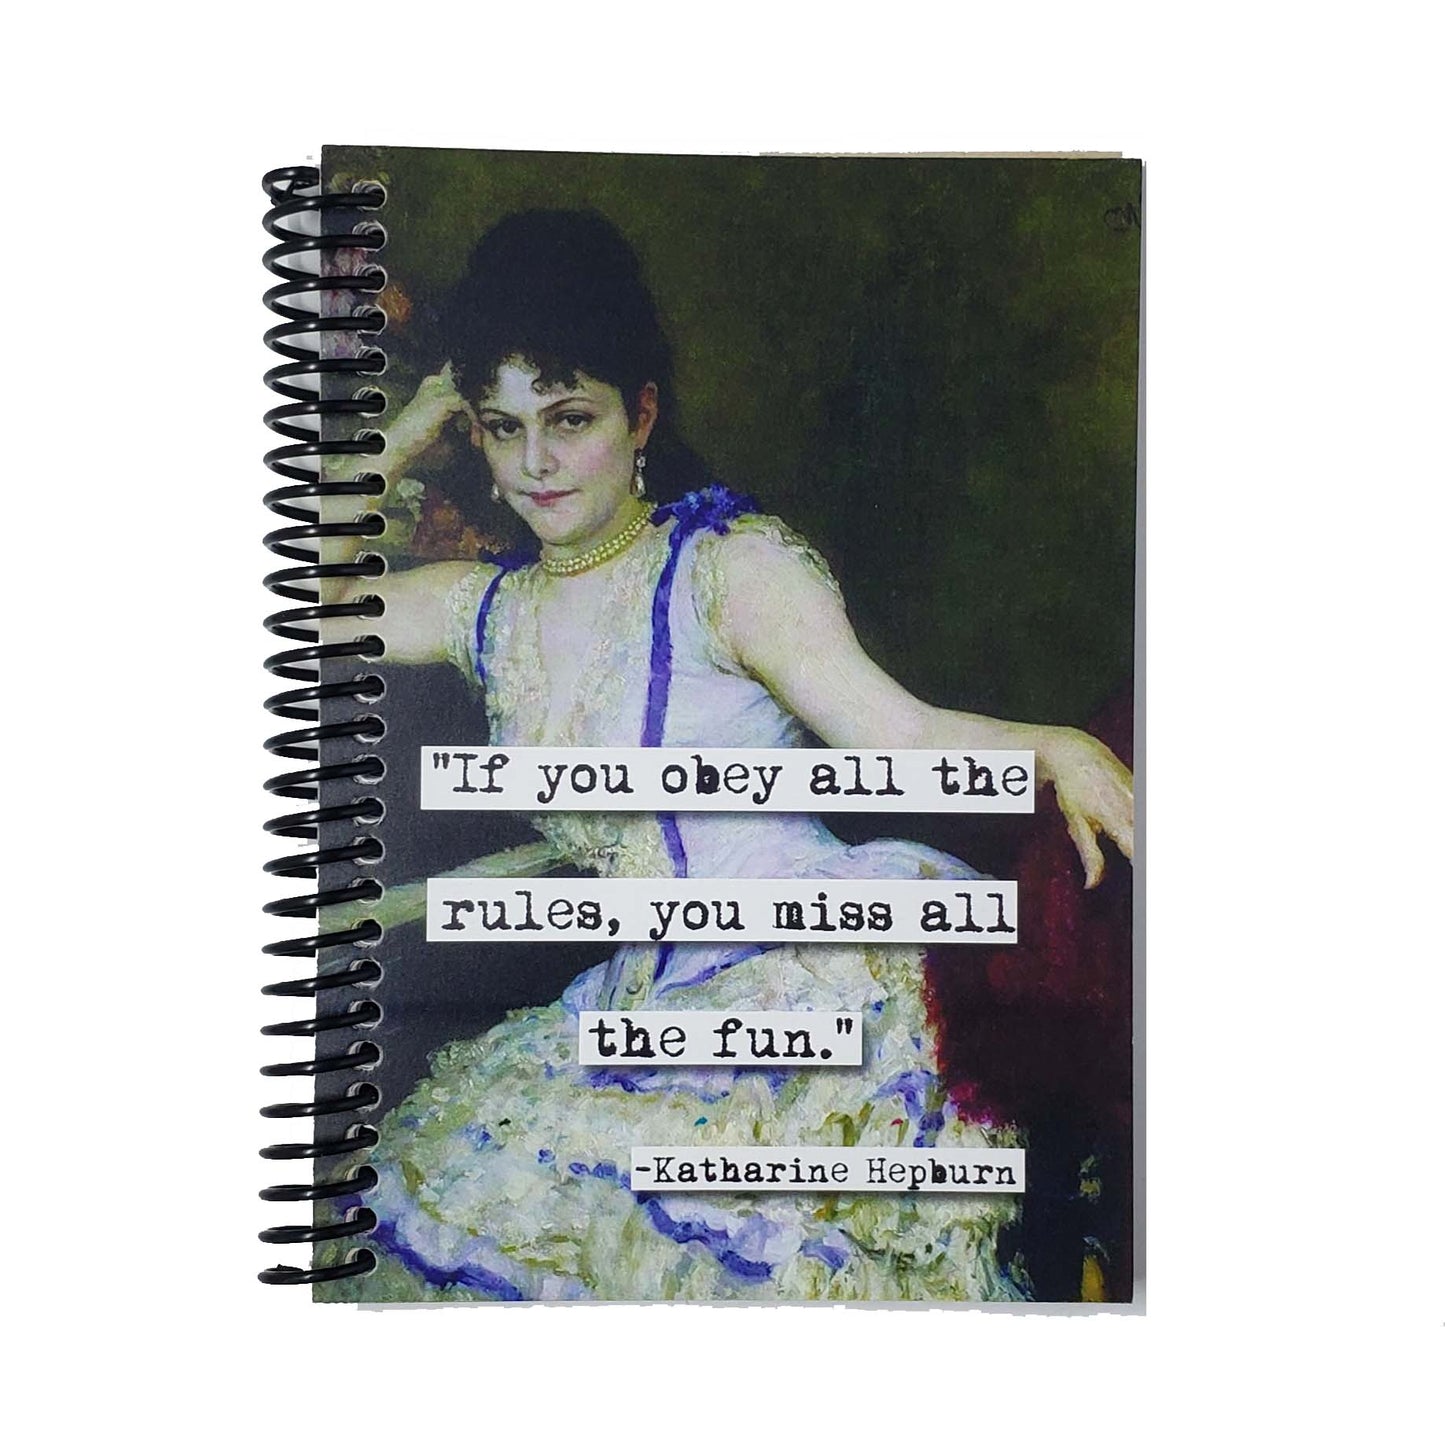 Katharine Hepburn Obey All the Rules Notebook